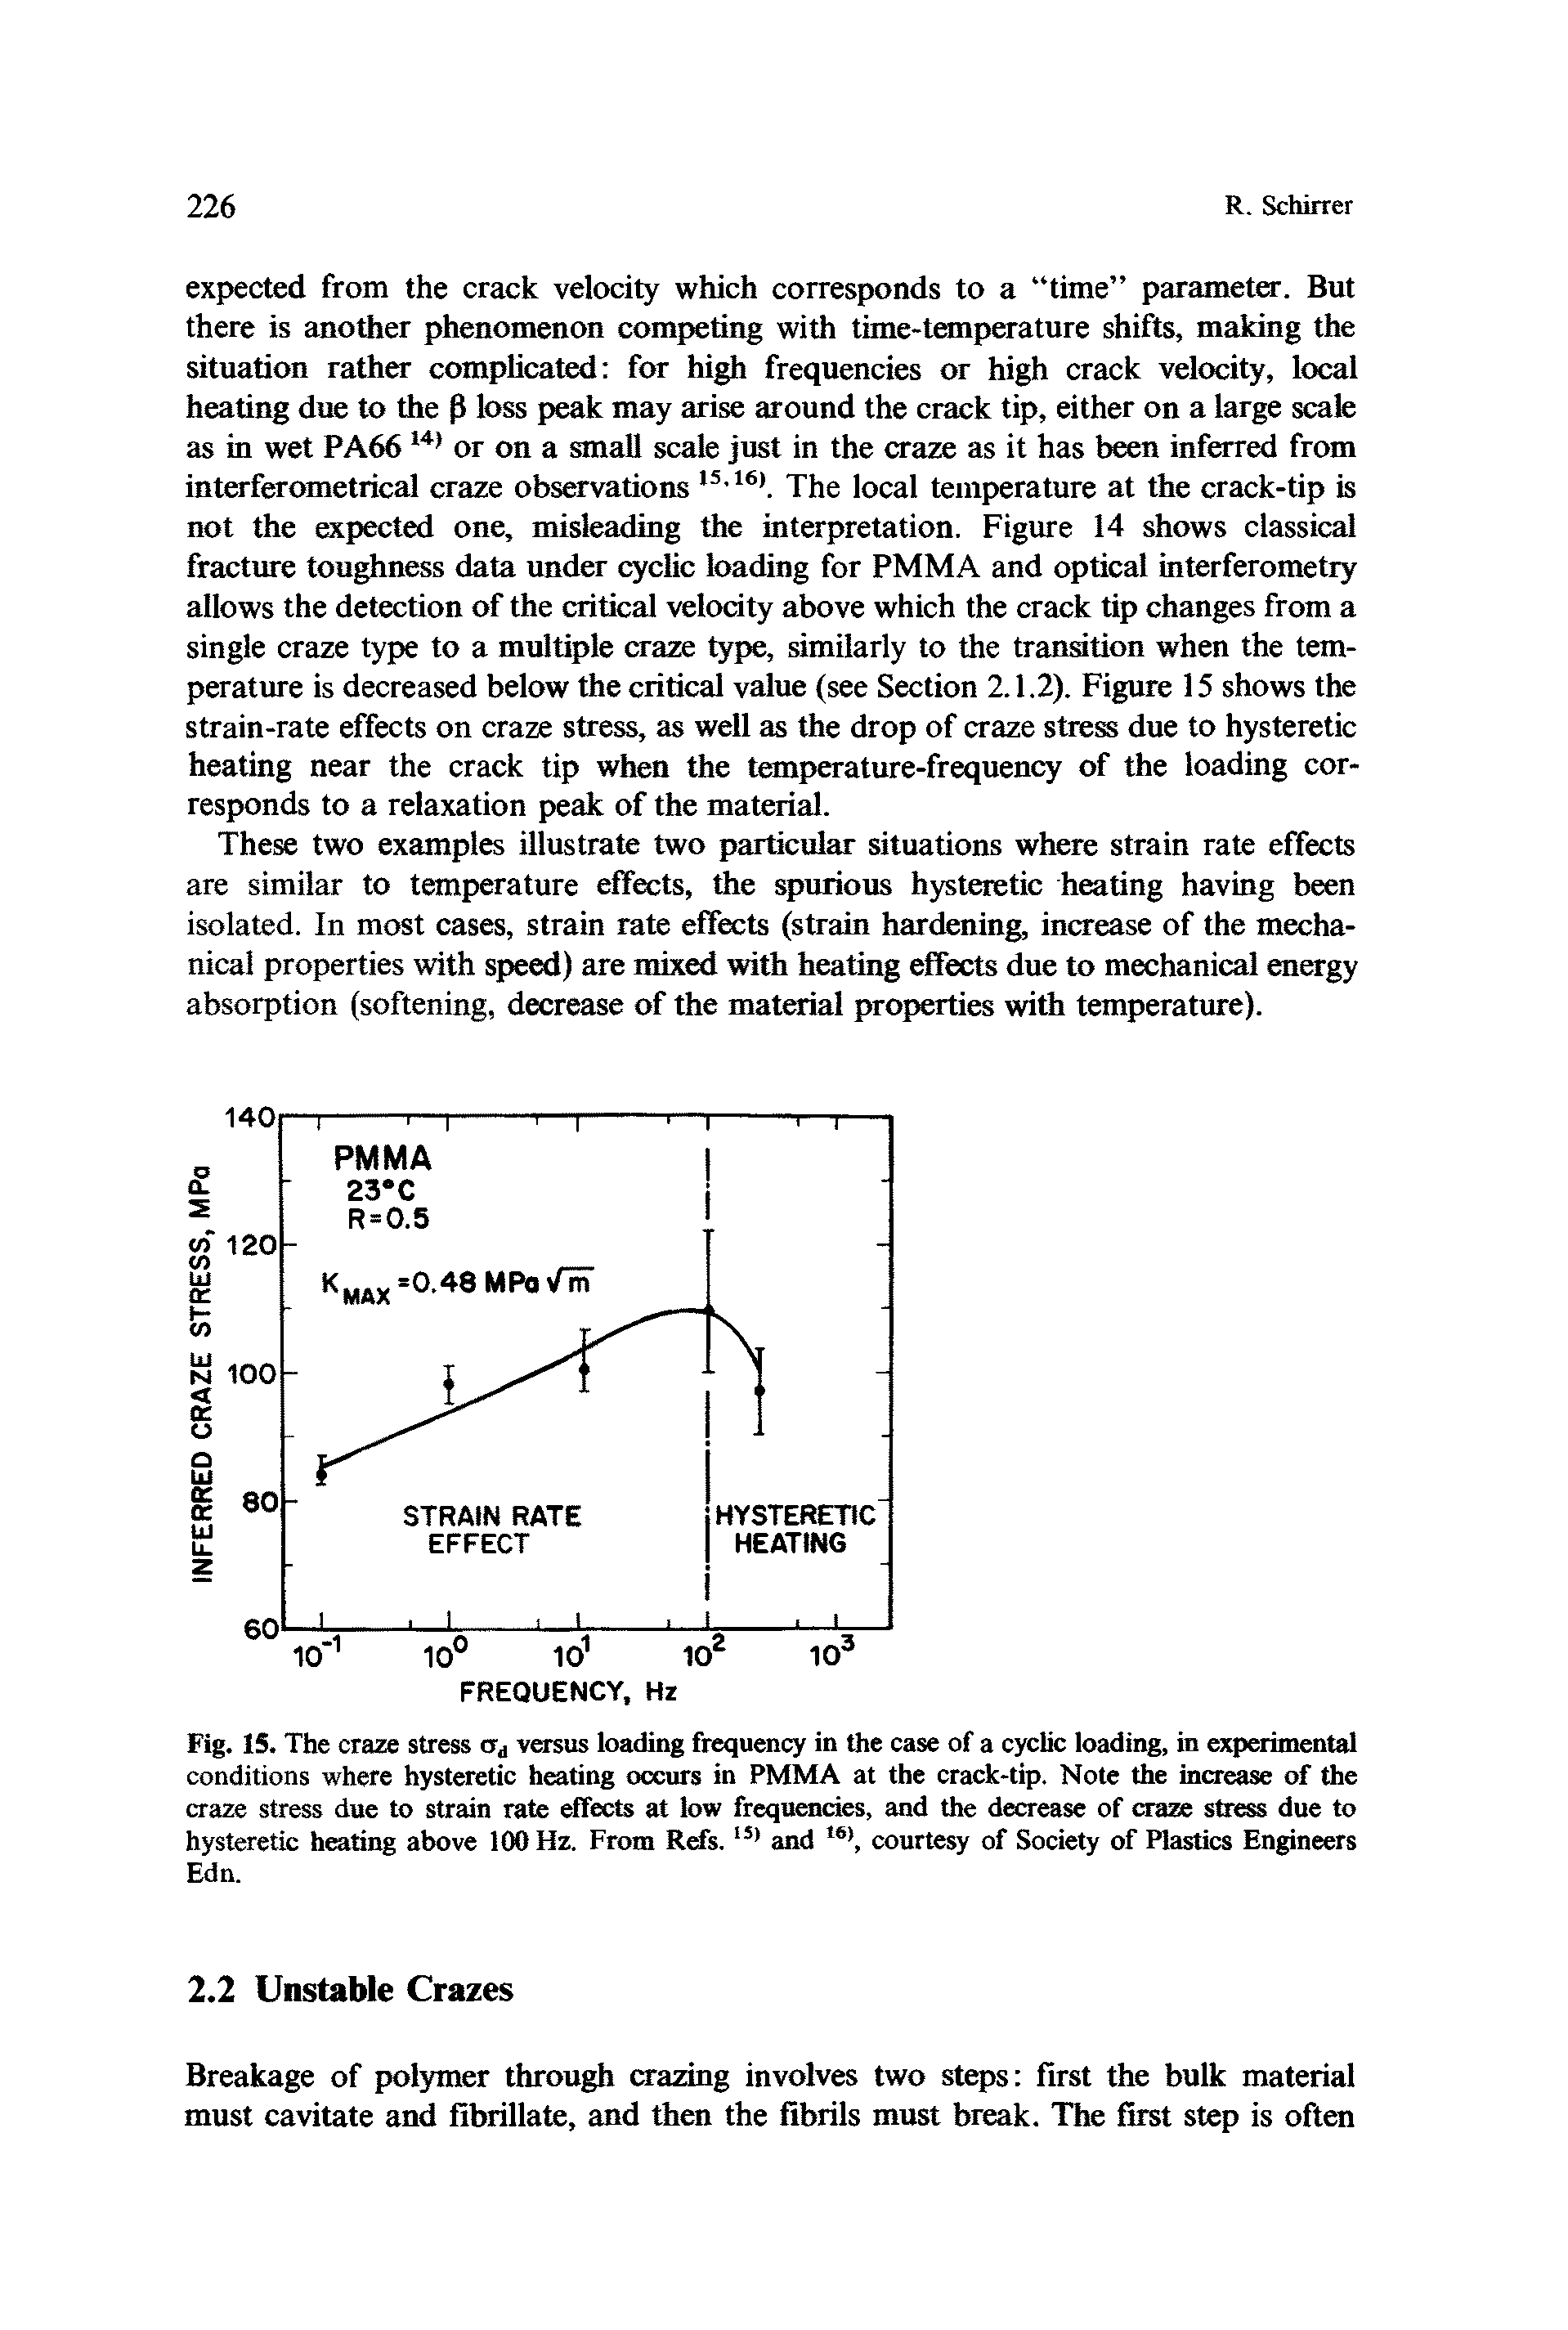 Fig. 15. The craze stress versus loading frequency in the case of a cyclic loading, in experimental conditions where hysteretic heating occurs in PMMA at the crack-tip. Note the increase of the craze stress due to strain rate effects at low frequencies, and the decrease of craze stress due to hysteretic heating above 100 Hz. From Refs. and courtesy of Society of Plastics Engineers Edn.